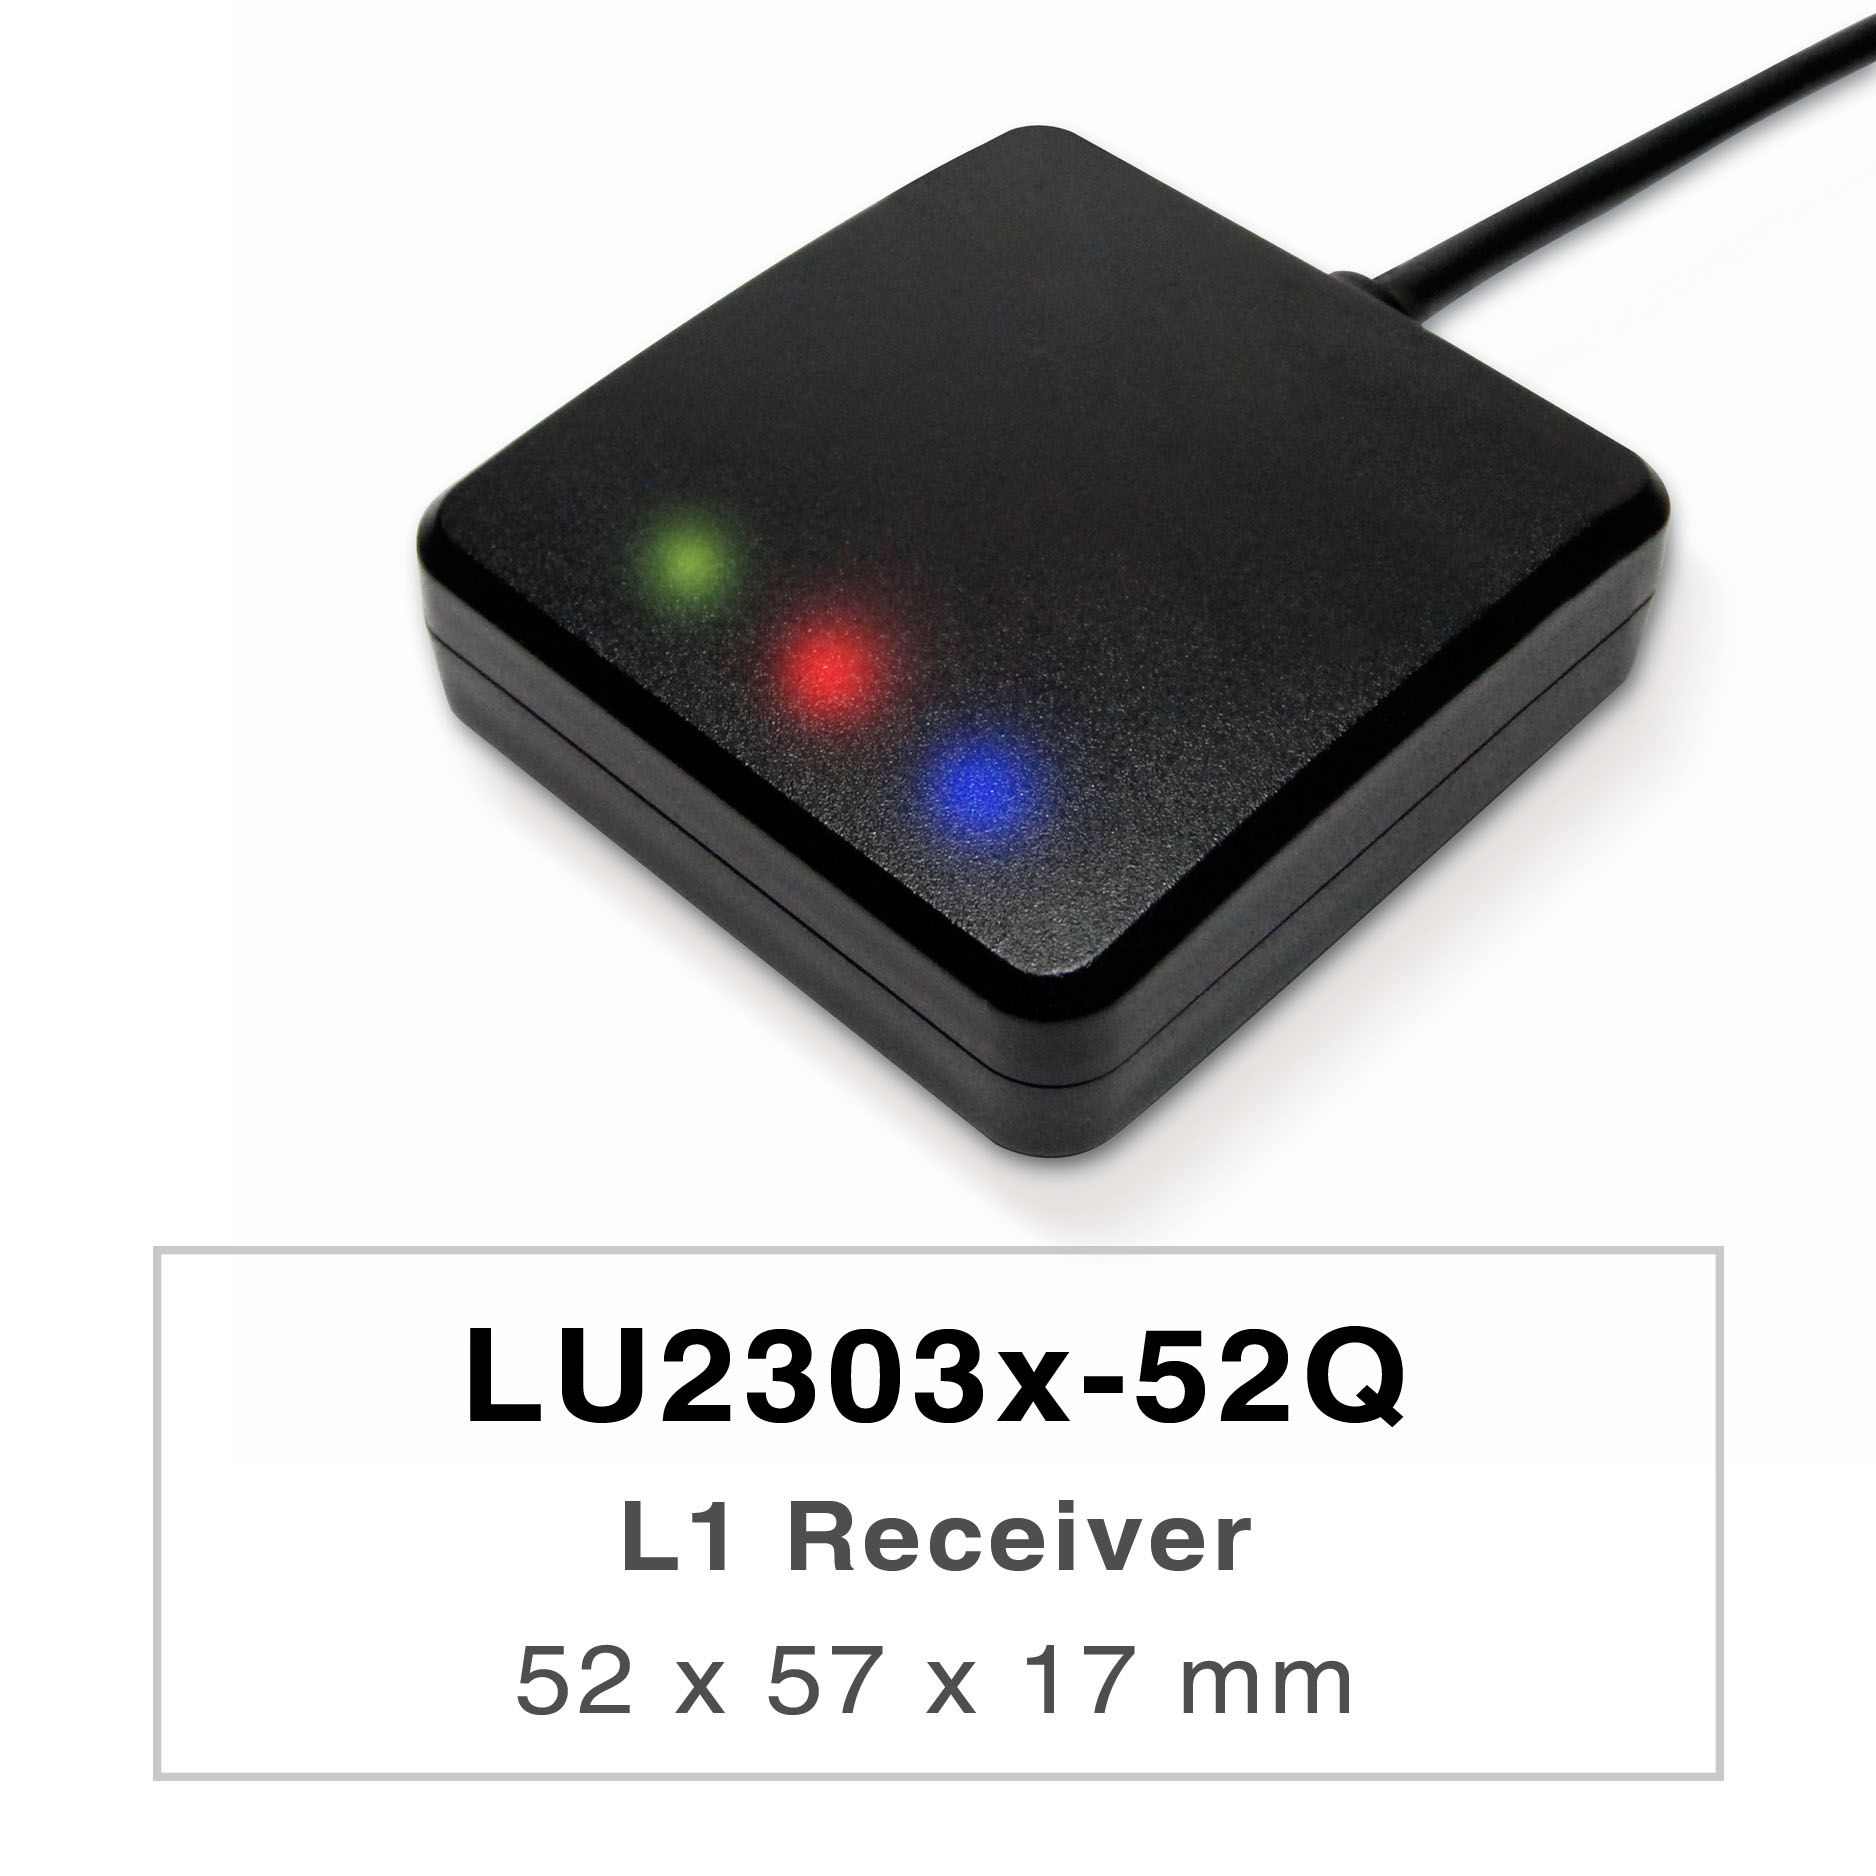 LU2303x-Vx series products are high-performance dual-band GNSS receivers (also known as
GNSS mouse) that are capable of tracking all global civil navigation systems (GPS, GLONASS,
BDS, GALILEO, QZSS and IRNSS).